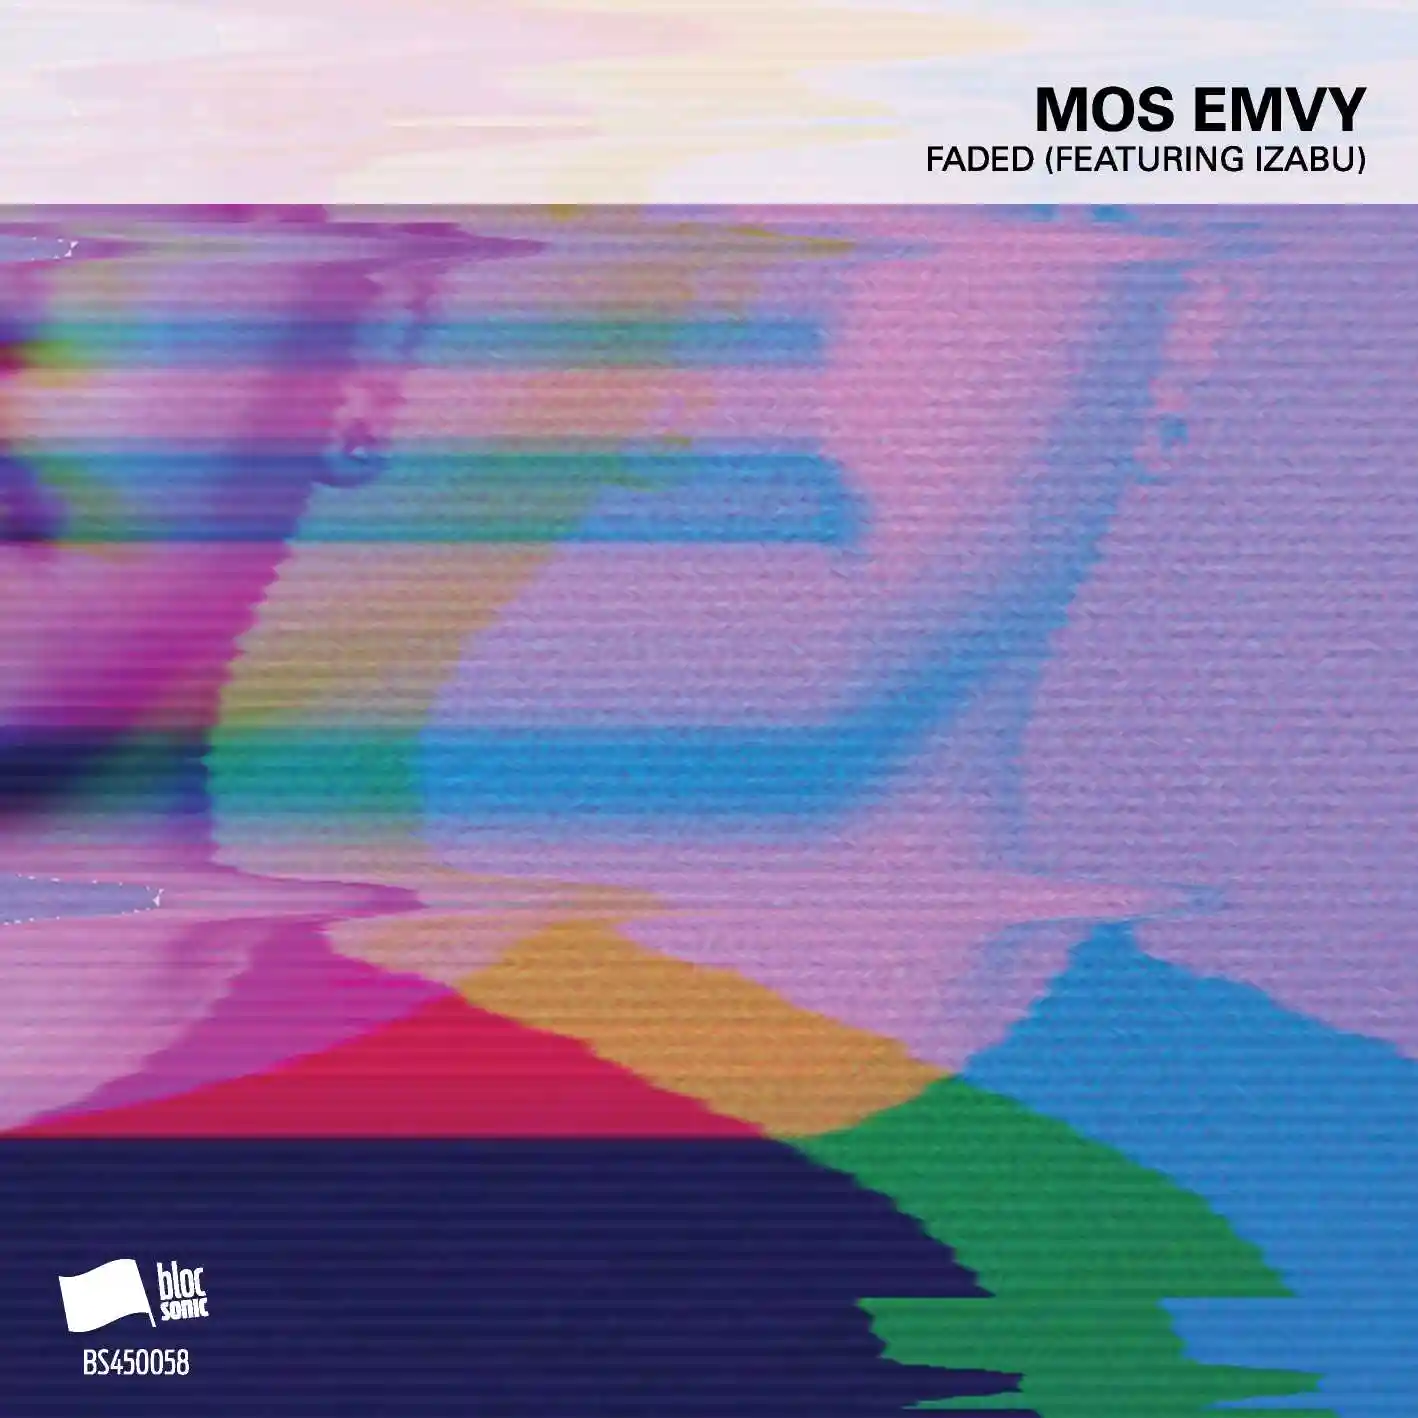 Album cover for “Faded (Featuring Izabu)” by Mos Emvy